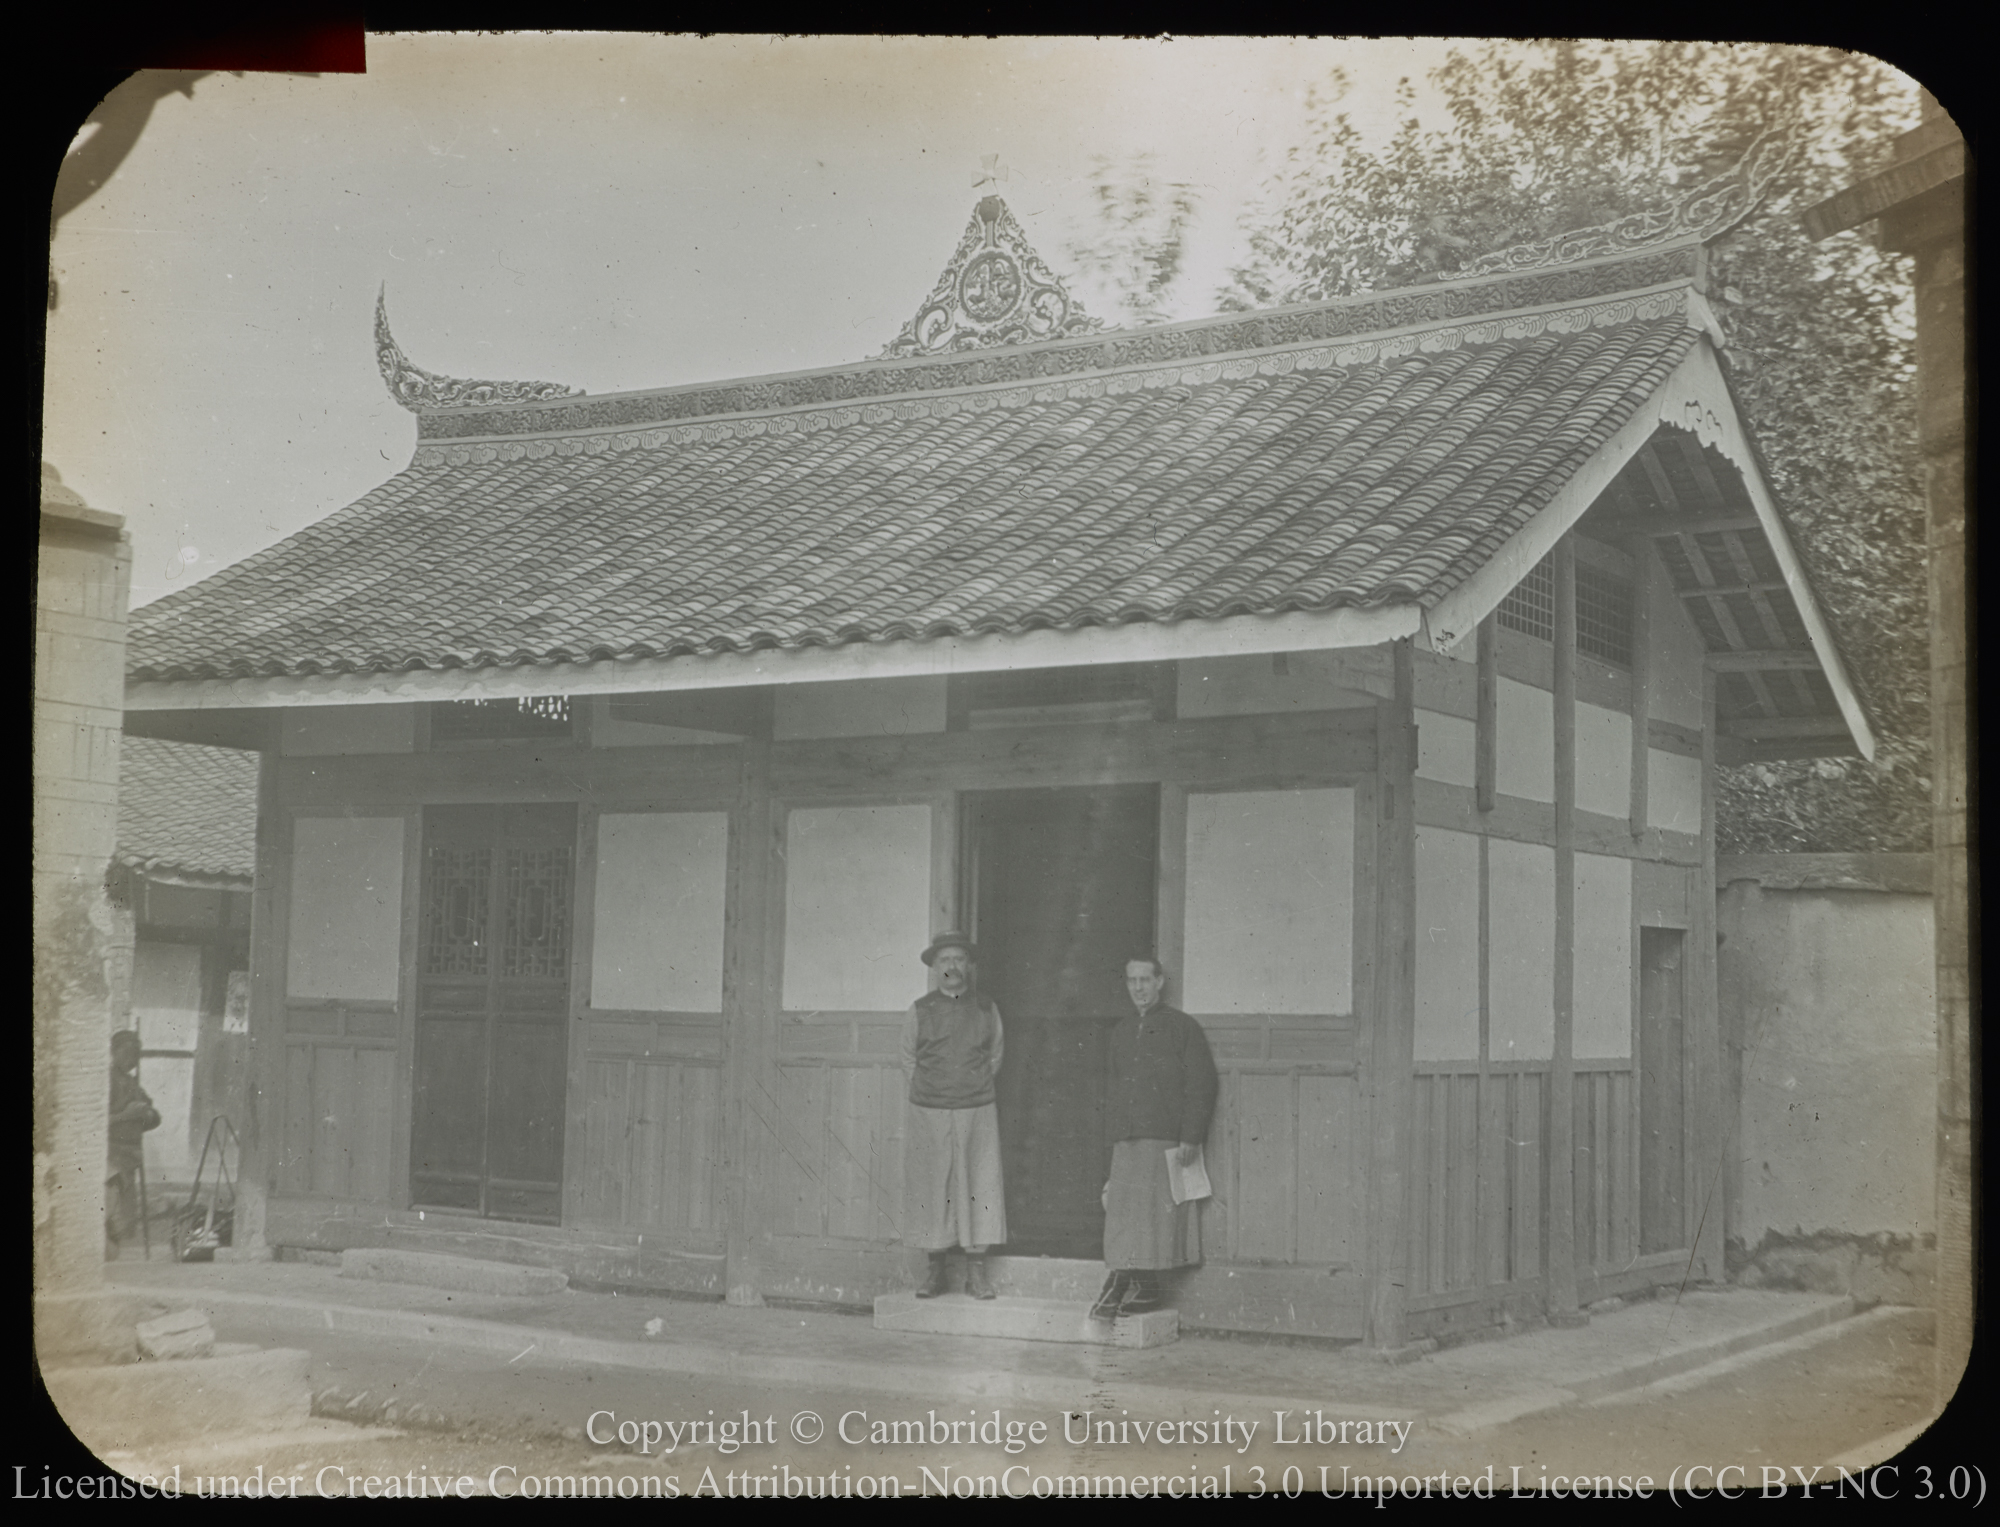 Book Room, Mienchow, 1910